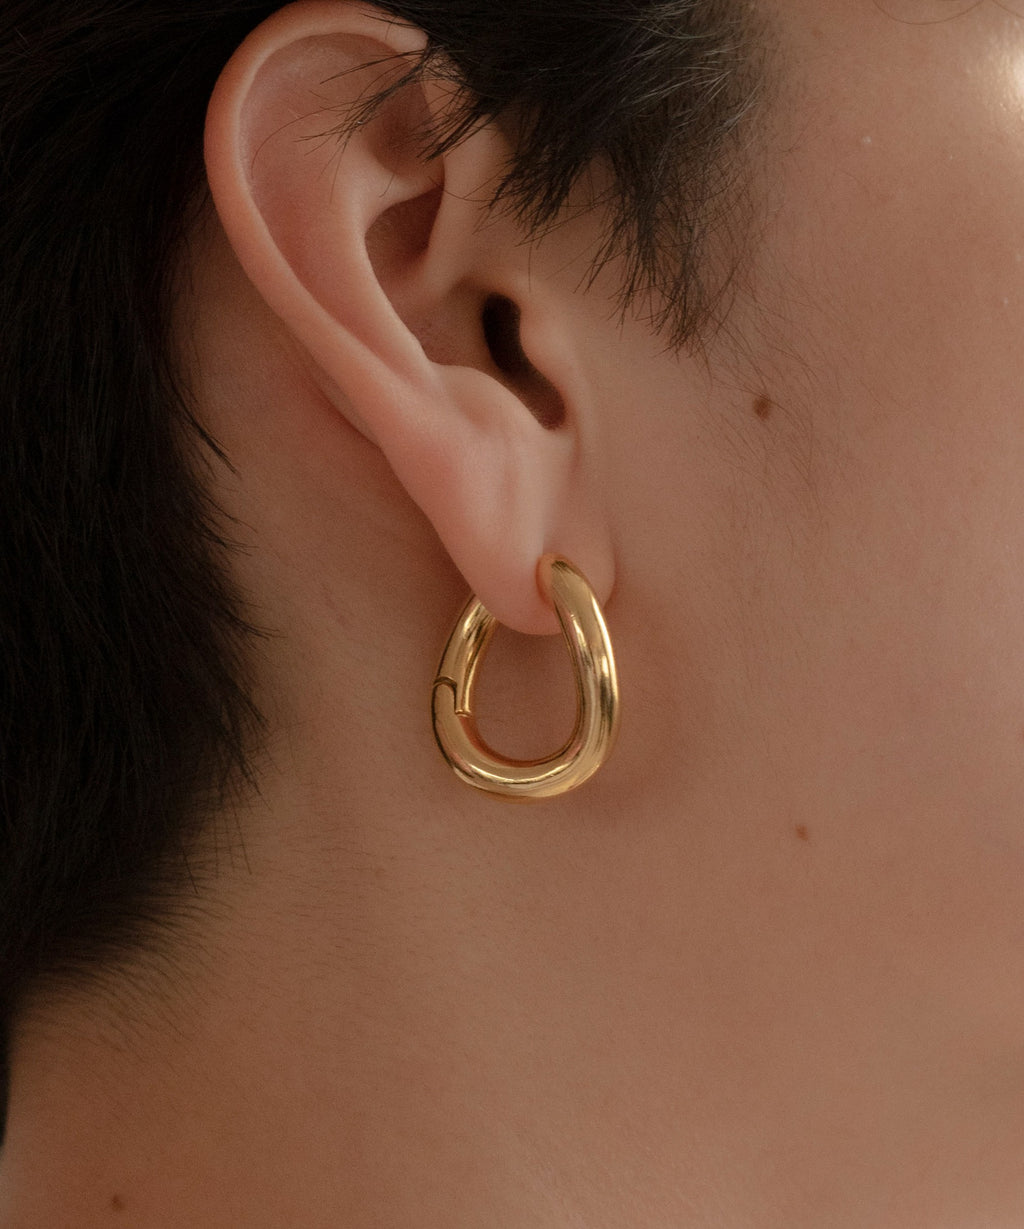 【Nothing And Others】Oval Pierce